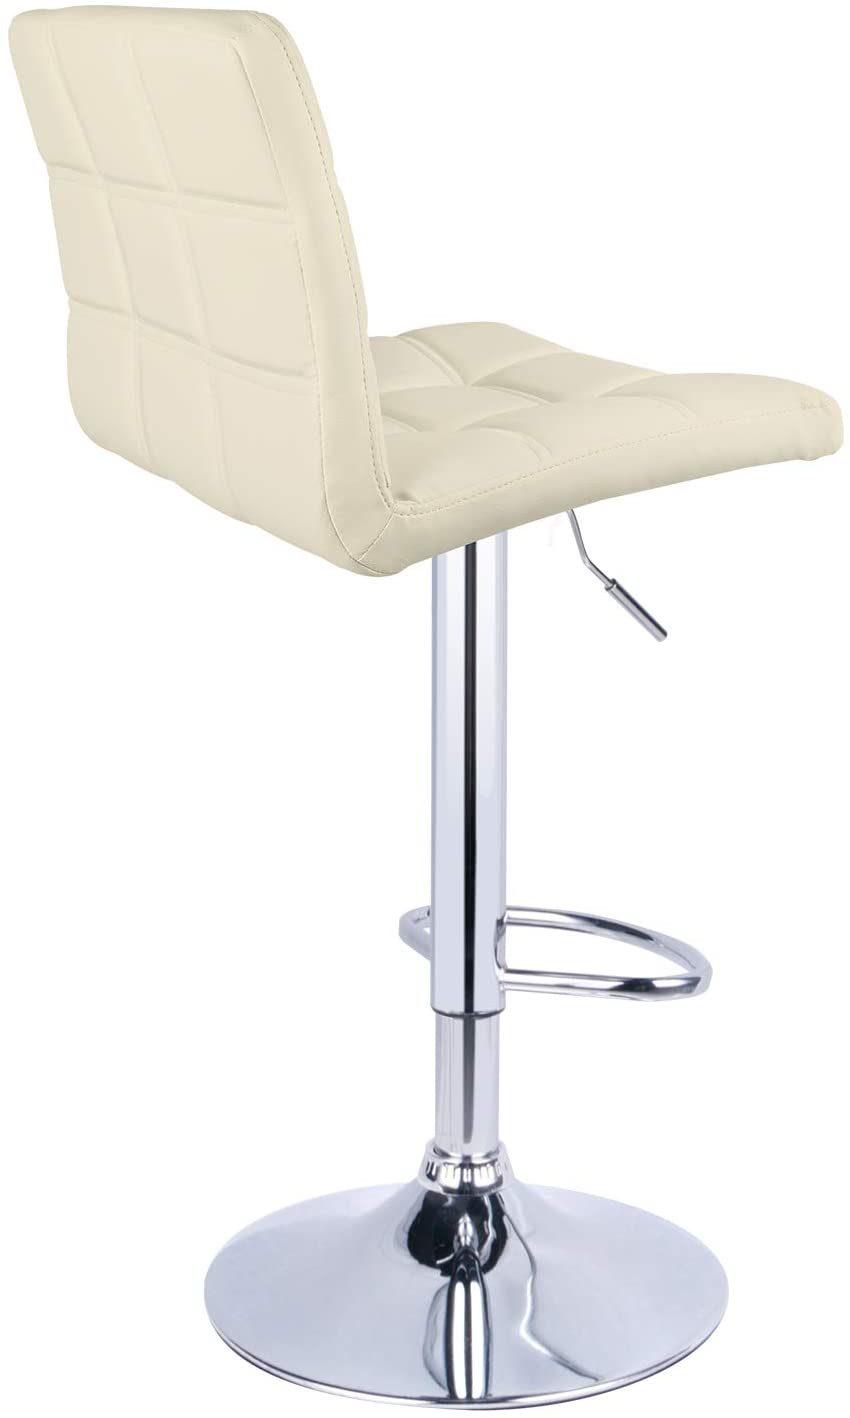 High Quality Low Price Hot Sell Modern Style Metal Dining Bar Chair Barstools